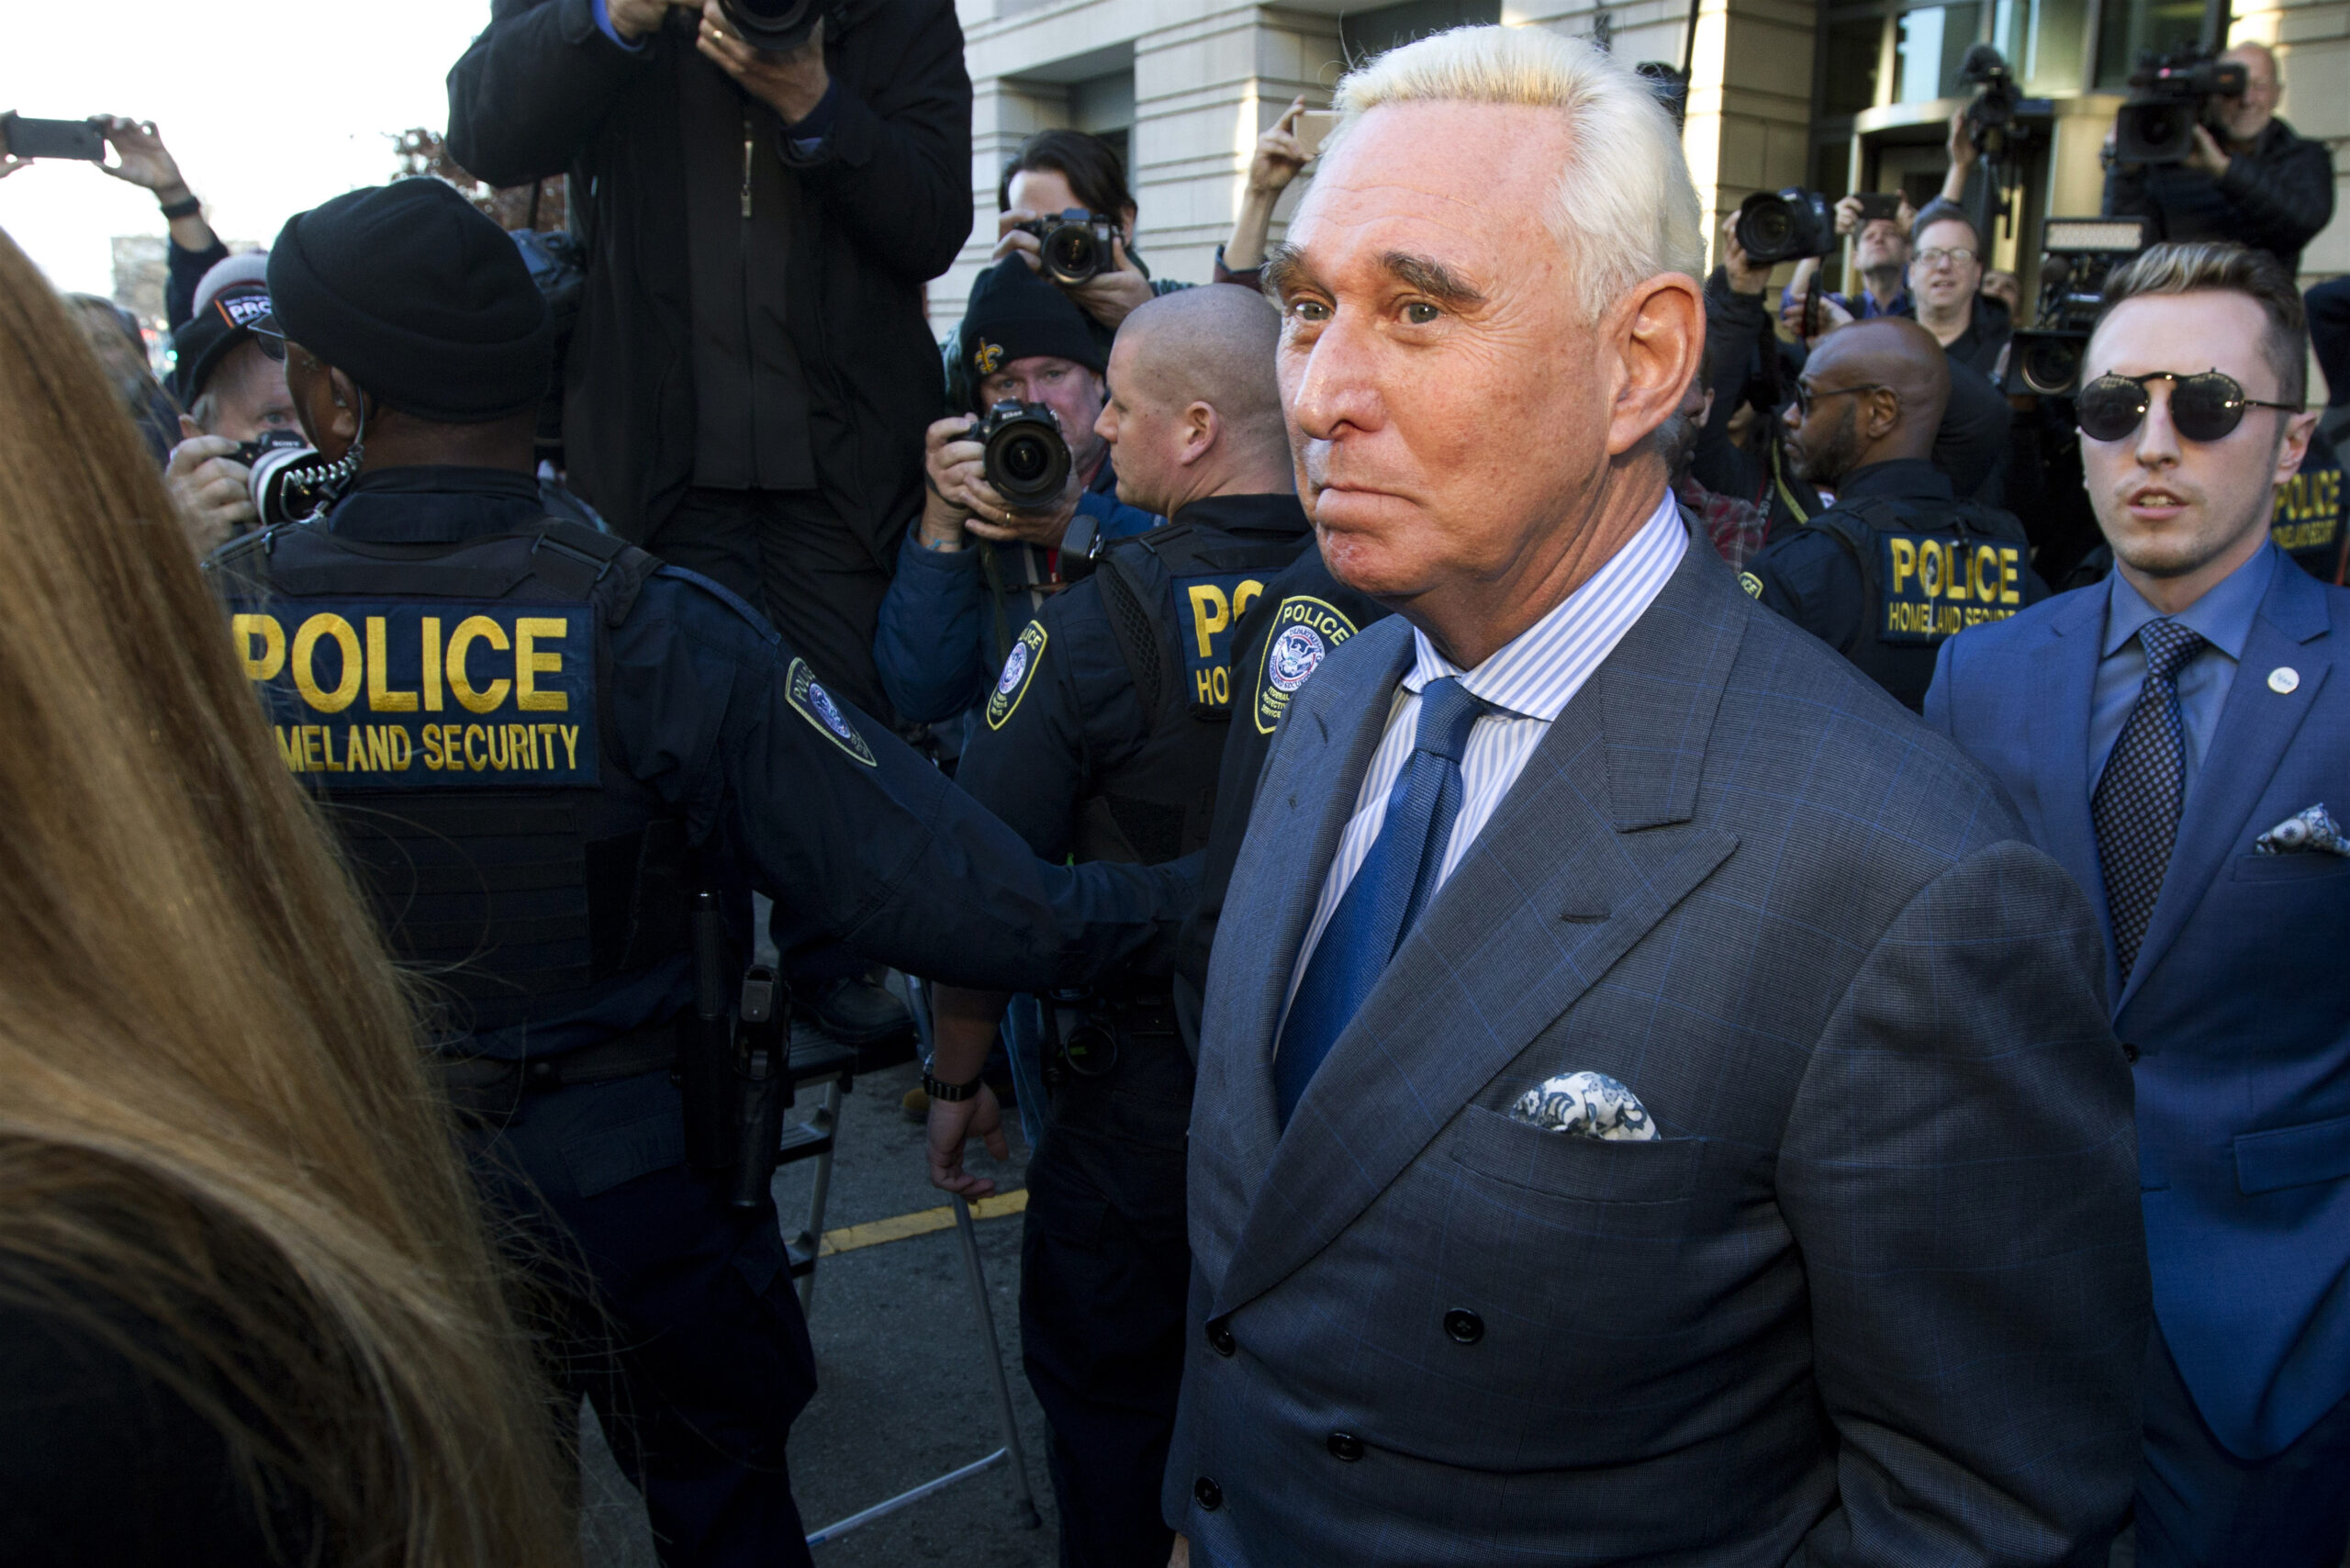 Capitol Police Investigating Roger Stone Remarks About Assassinating Members of Congress (mediaite.com)